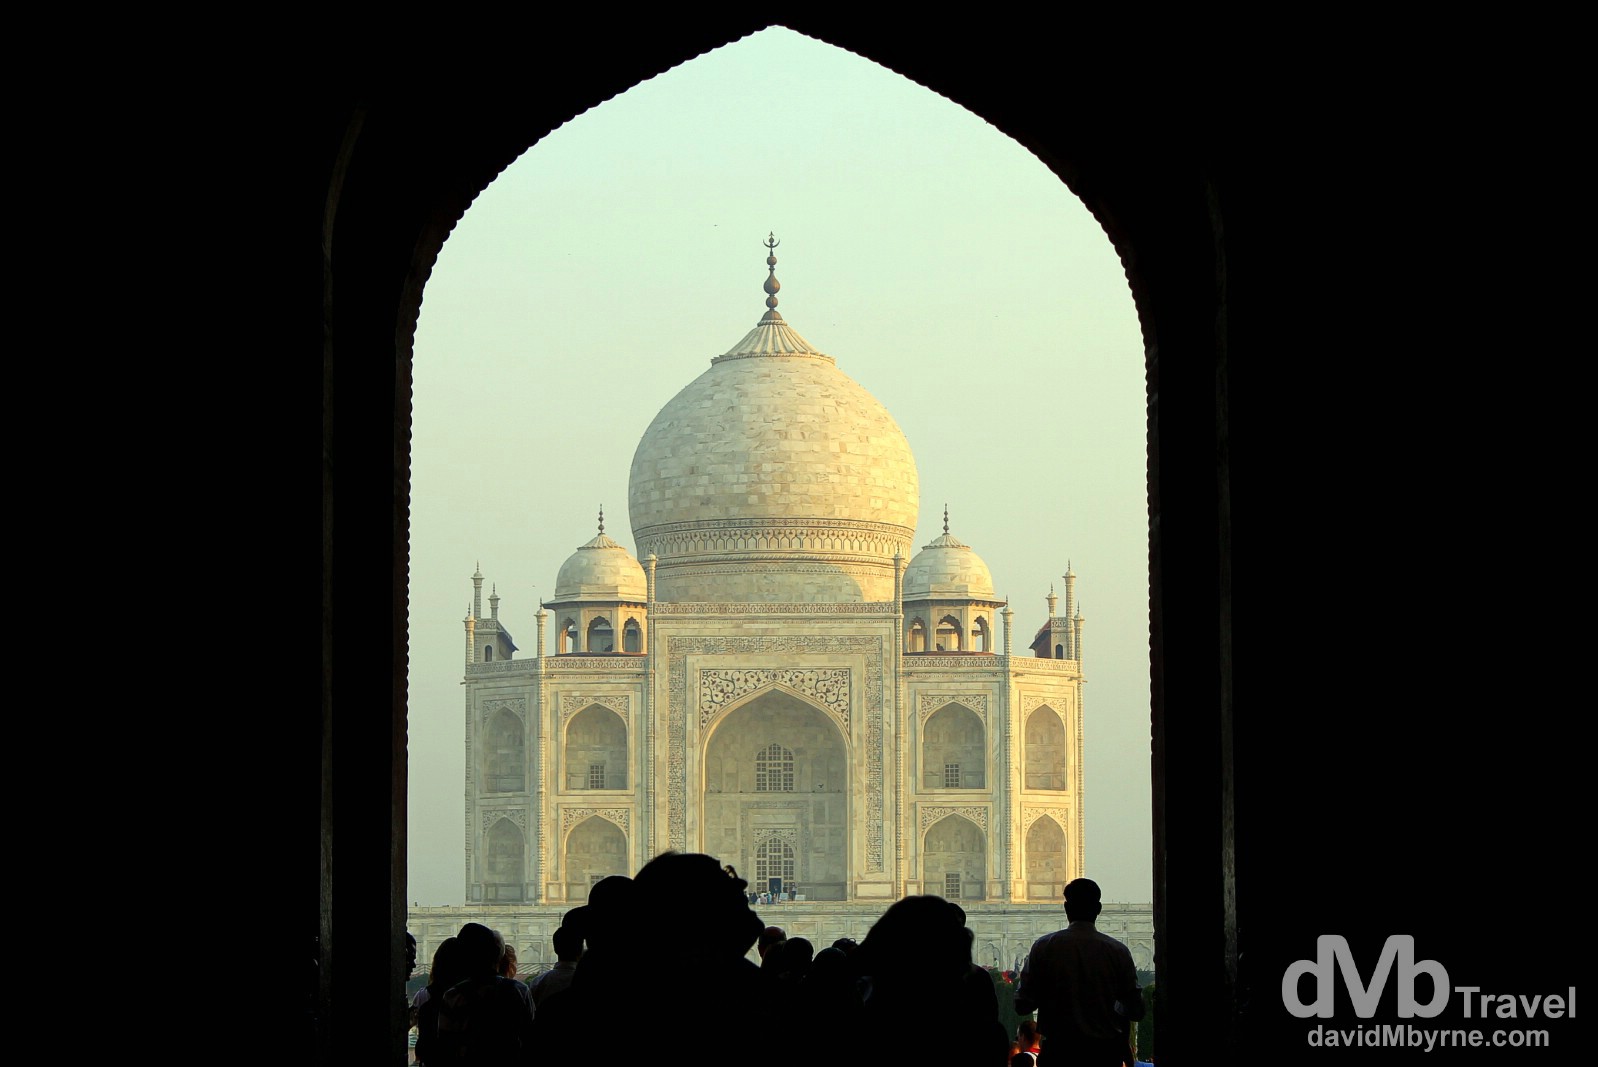 The TaJ Mahal at sunrise as seen from under the arch of the South Gate. Agra, Uttar Pradesh, India. October 11th 2012.